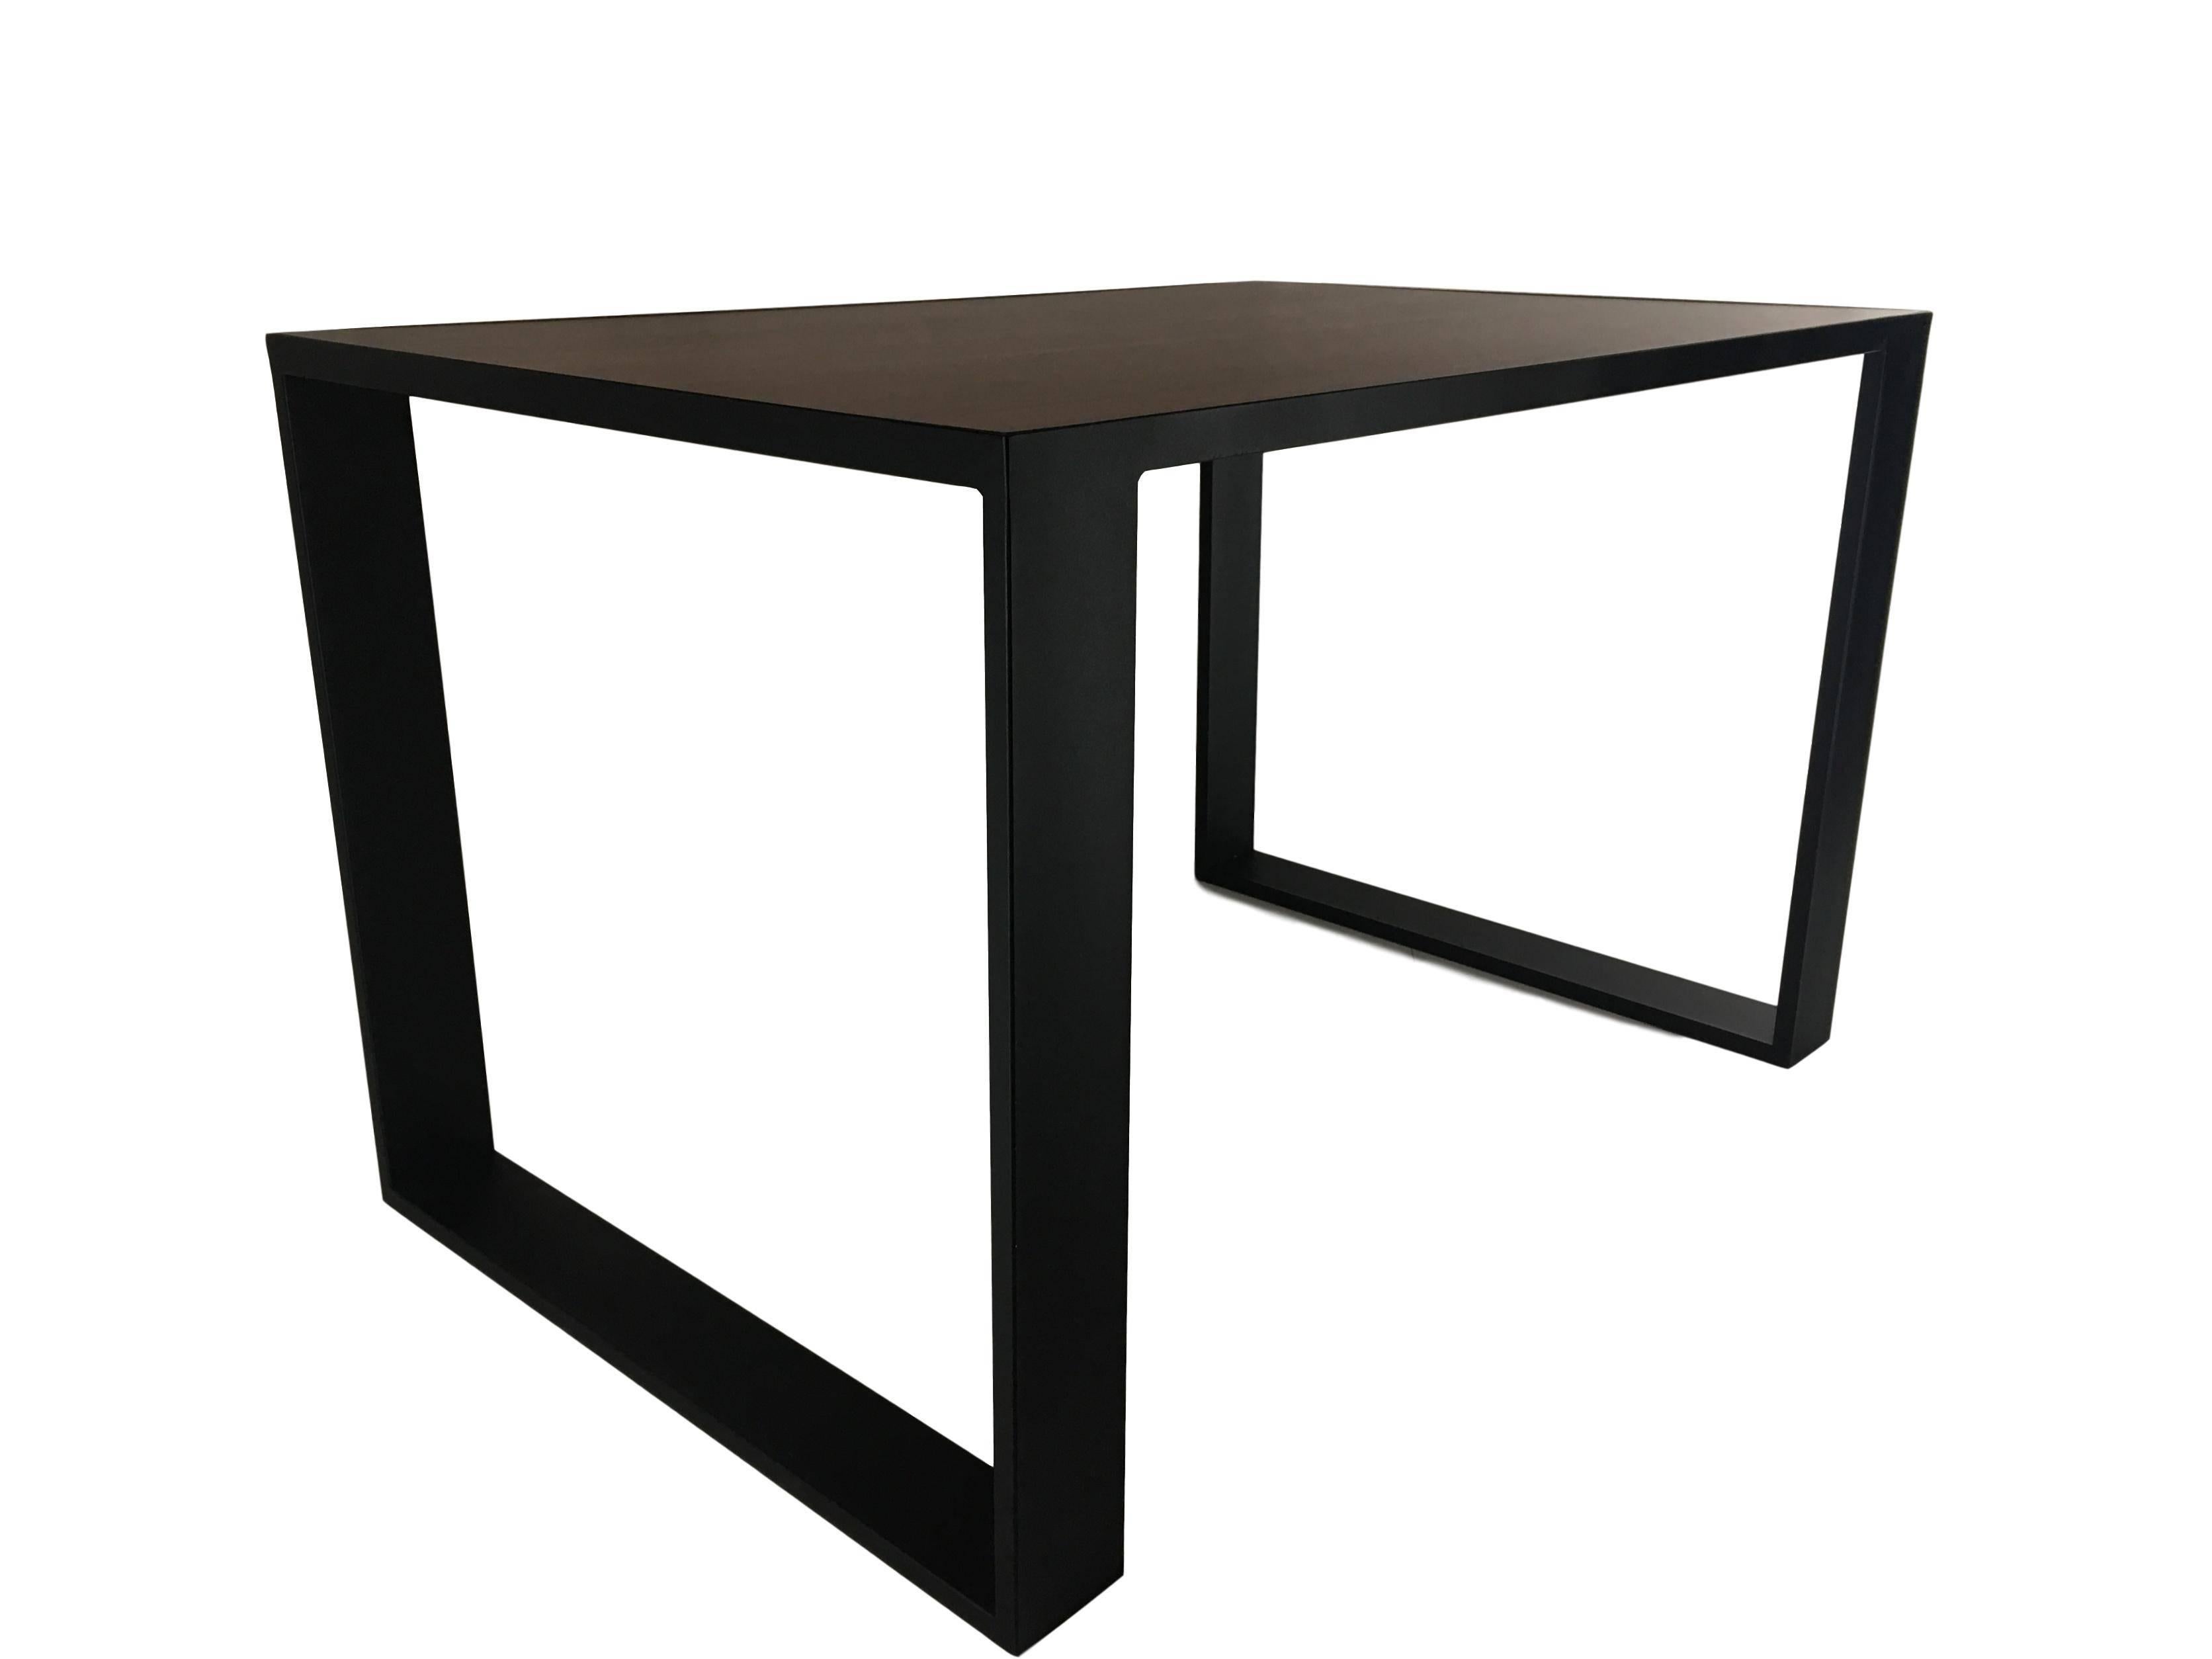 Spanish Rectangular Iron Cube Table with Embedded Wood Top, Dinner or Desk Table For Sale